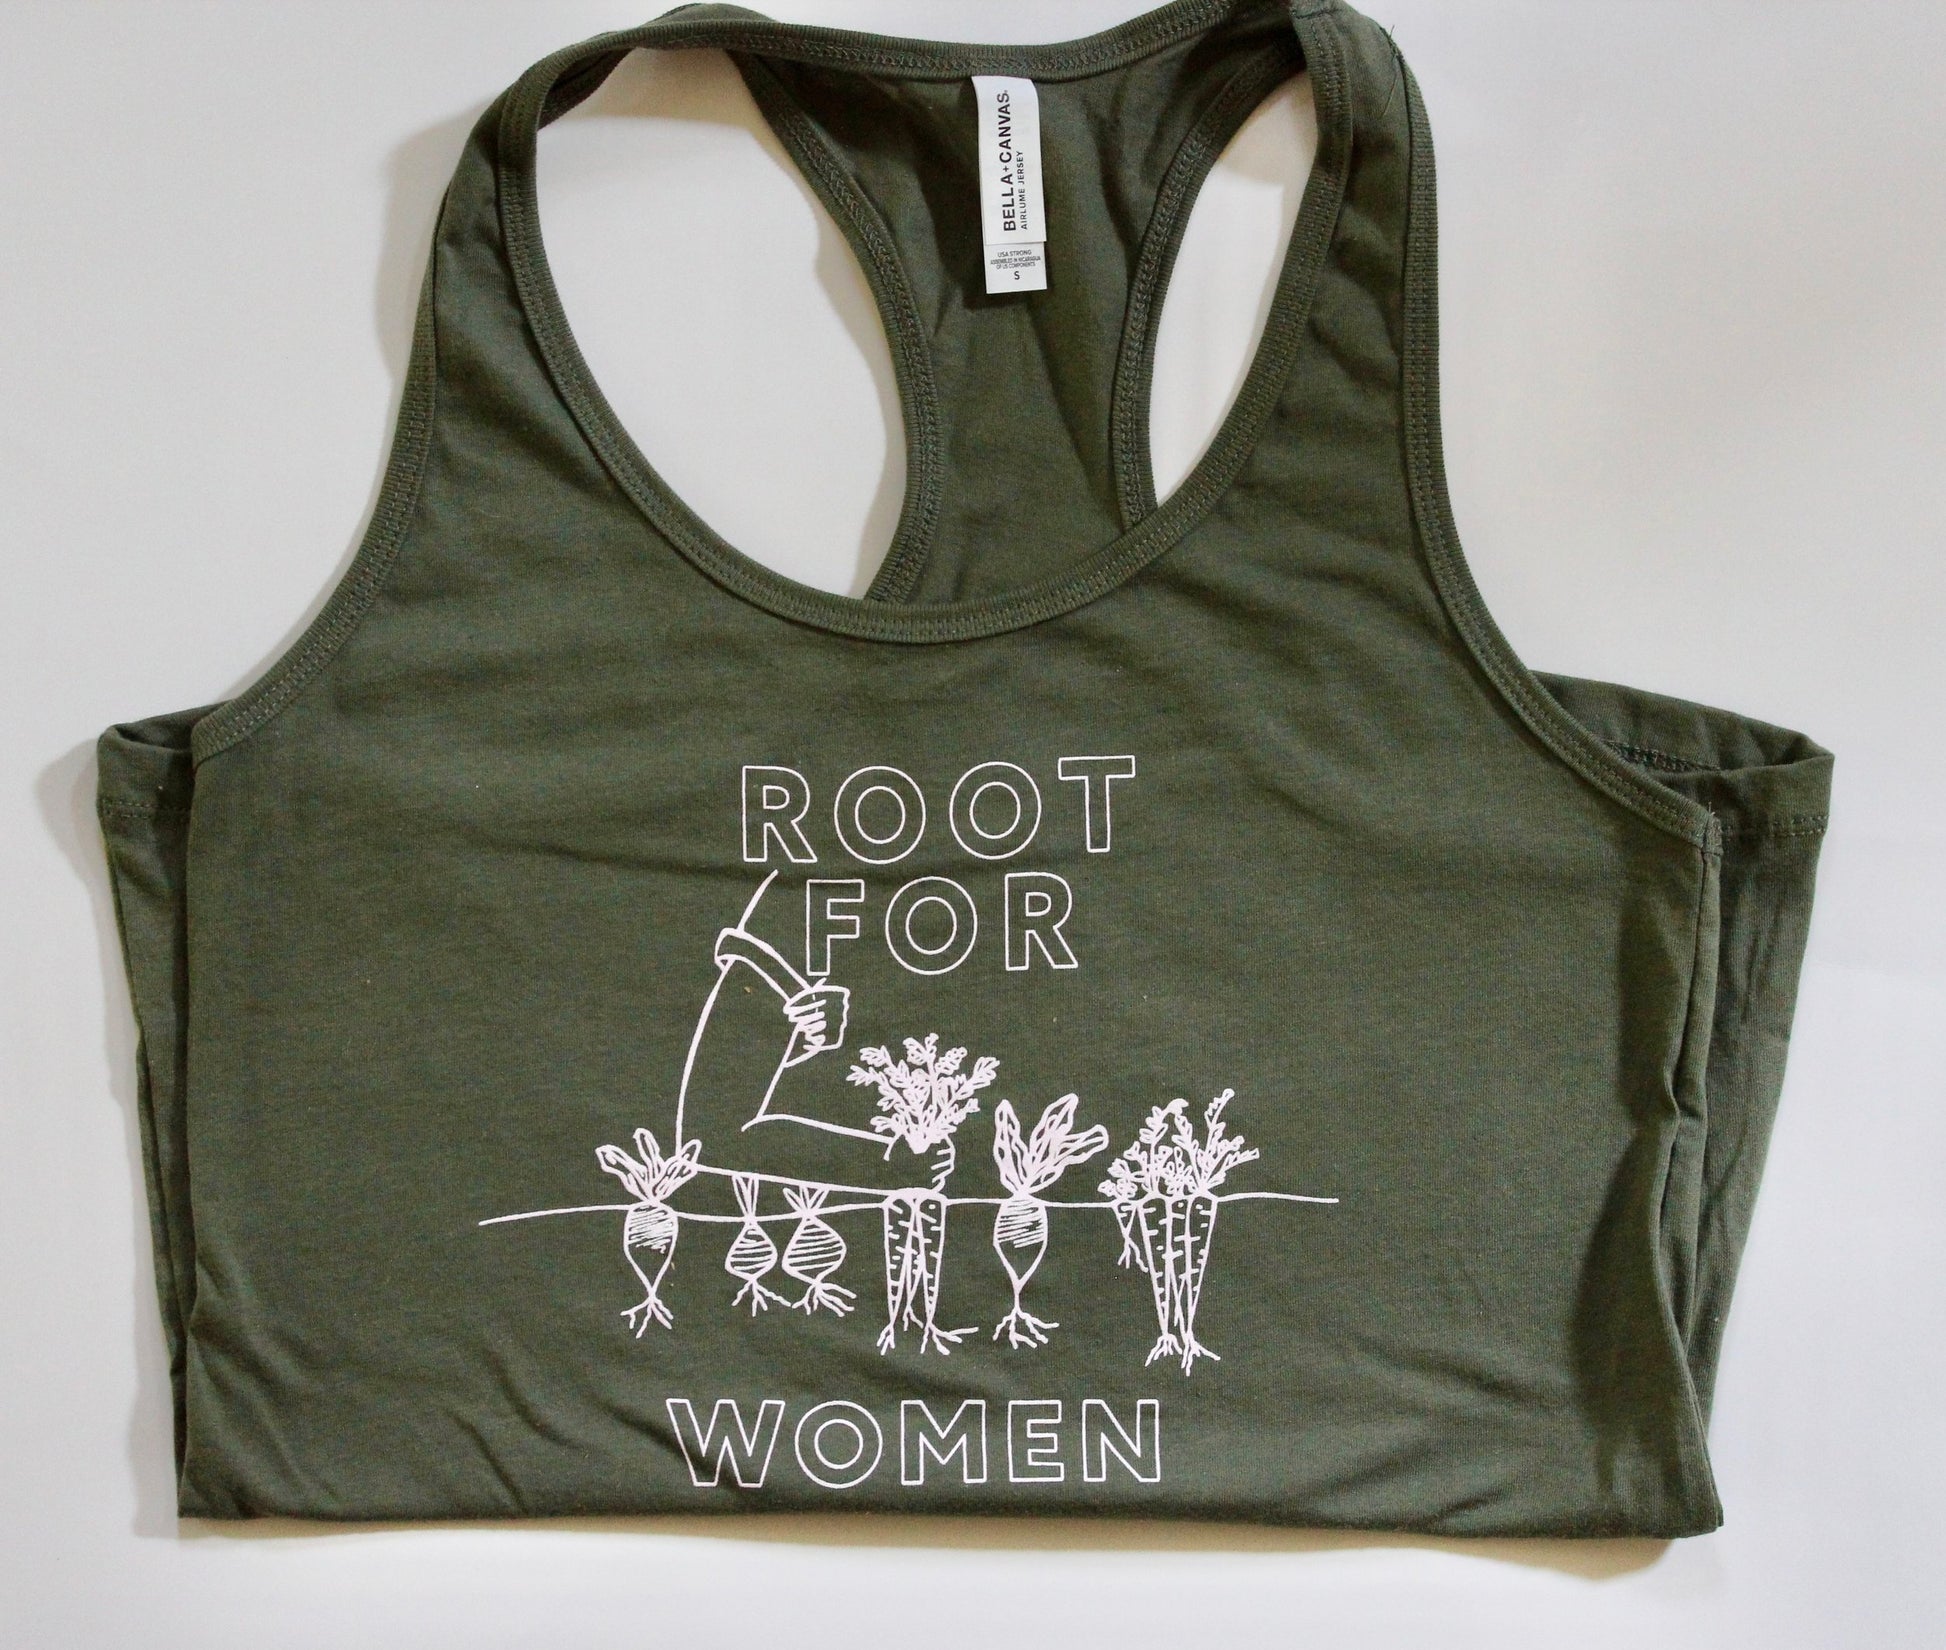 A folded olive green tank with block letters that read "Root for Women" and a garden illustration